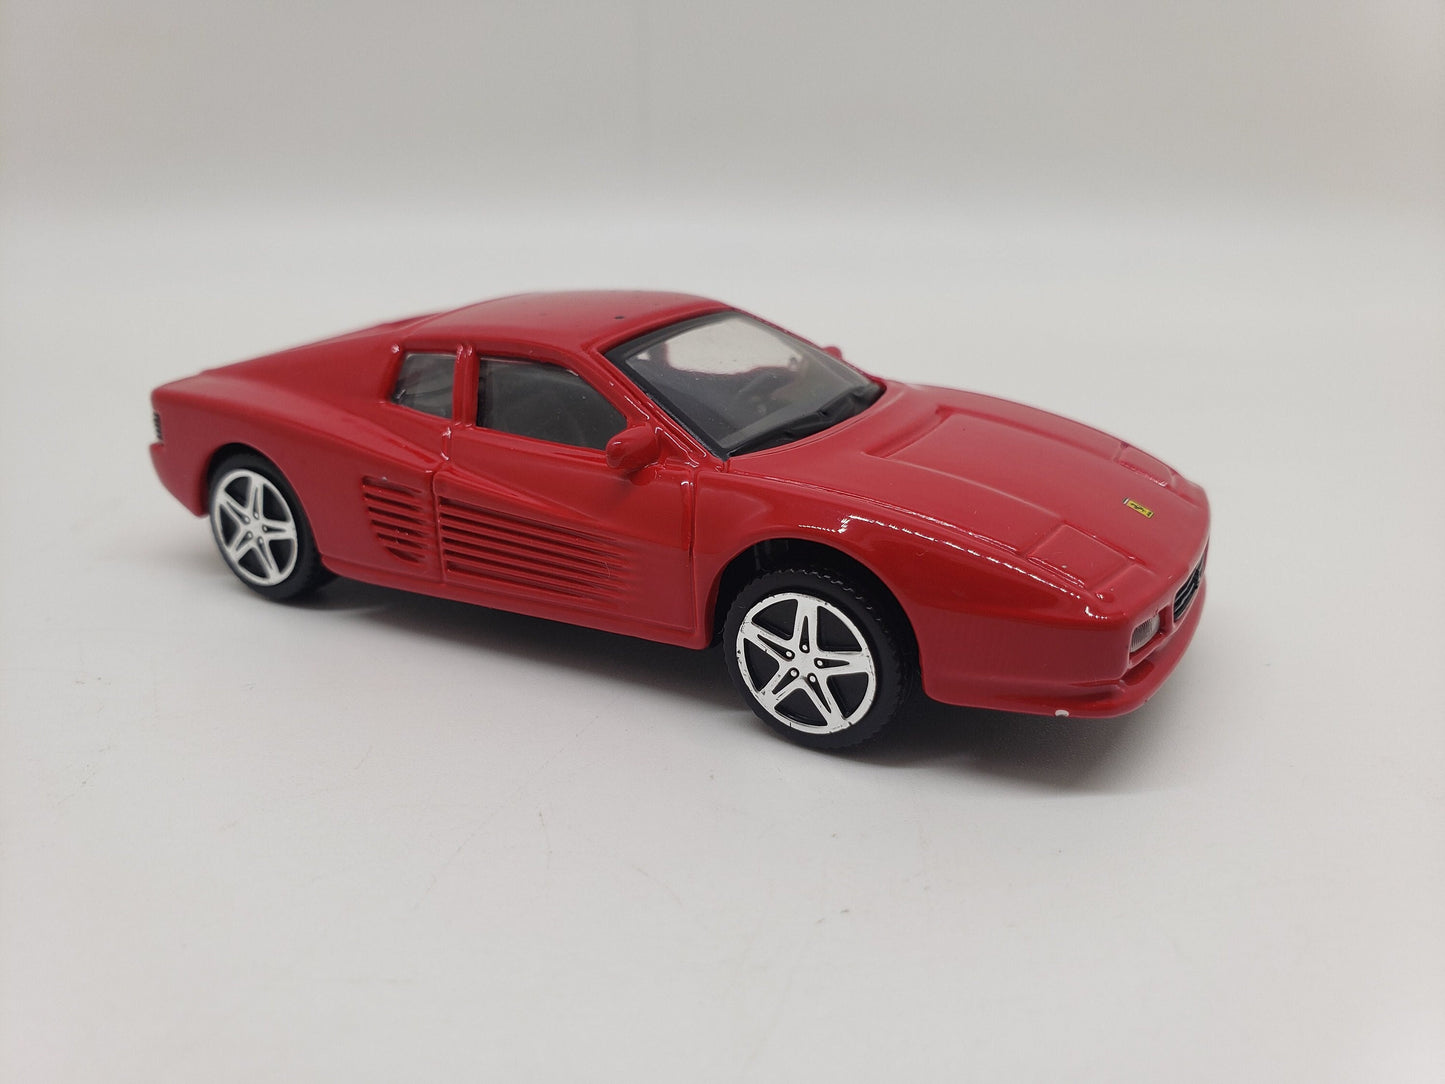 Burago 1992 Ferrari 512 TR Red Vintage Collectable Scale Model Miniature Toy Car Perfect Birthday Gift